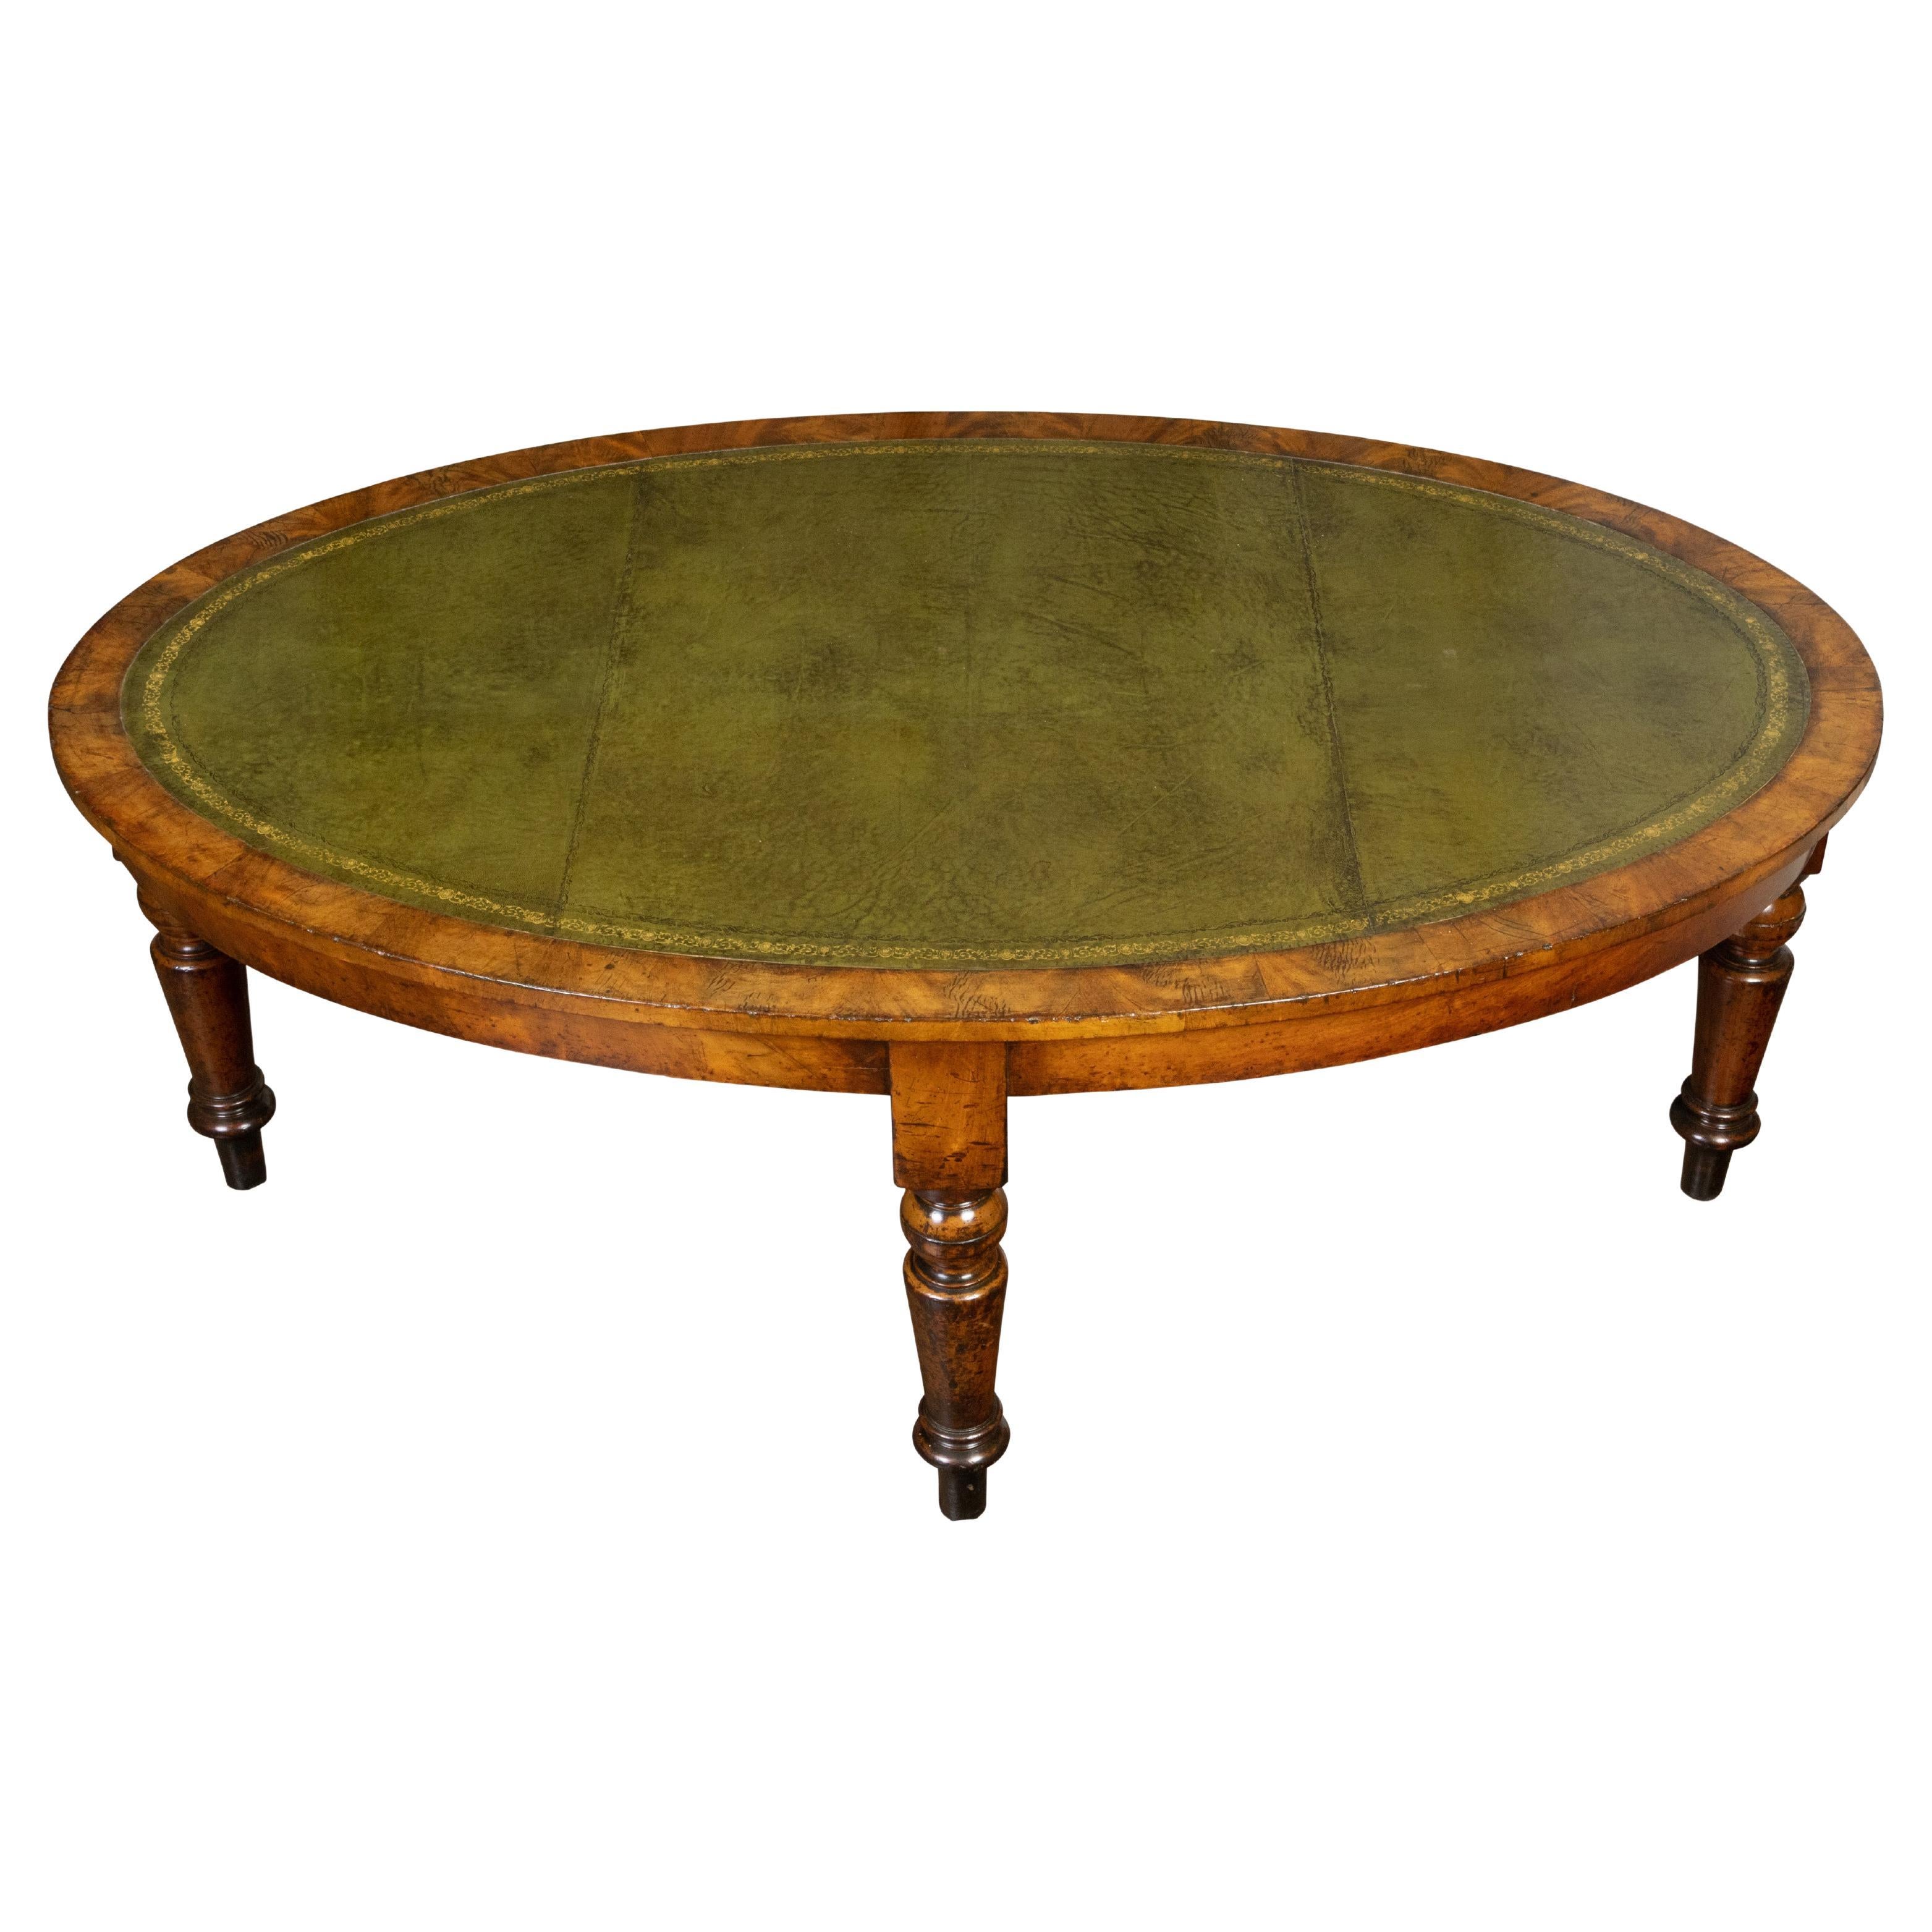 English 19th Century Mahogany Table with Green Leather Oval Top and Turned Legs For Sale